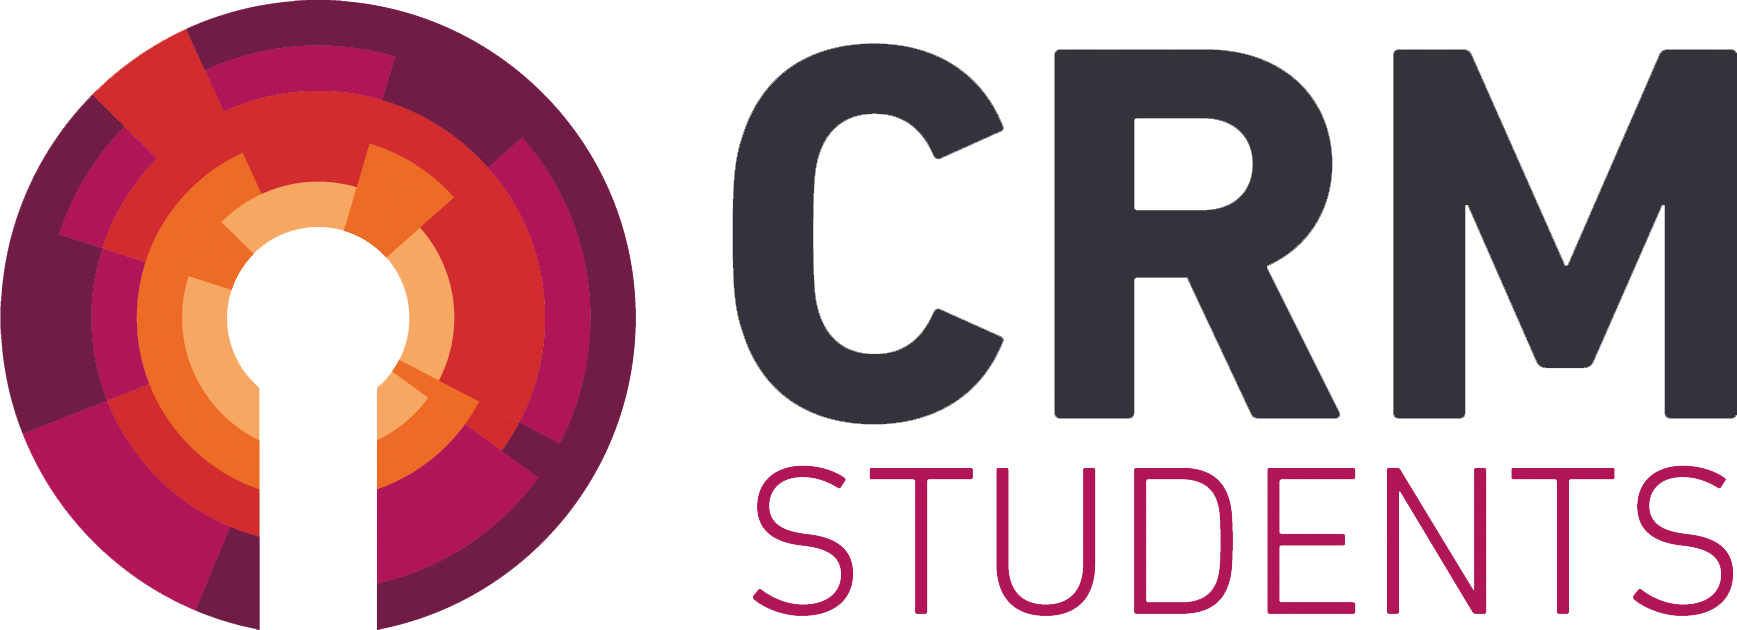 CRM Logo - The UK's Leading Provider of Student Accommodation - CRM Students